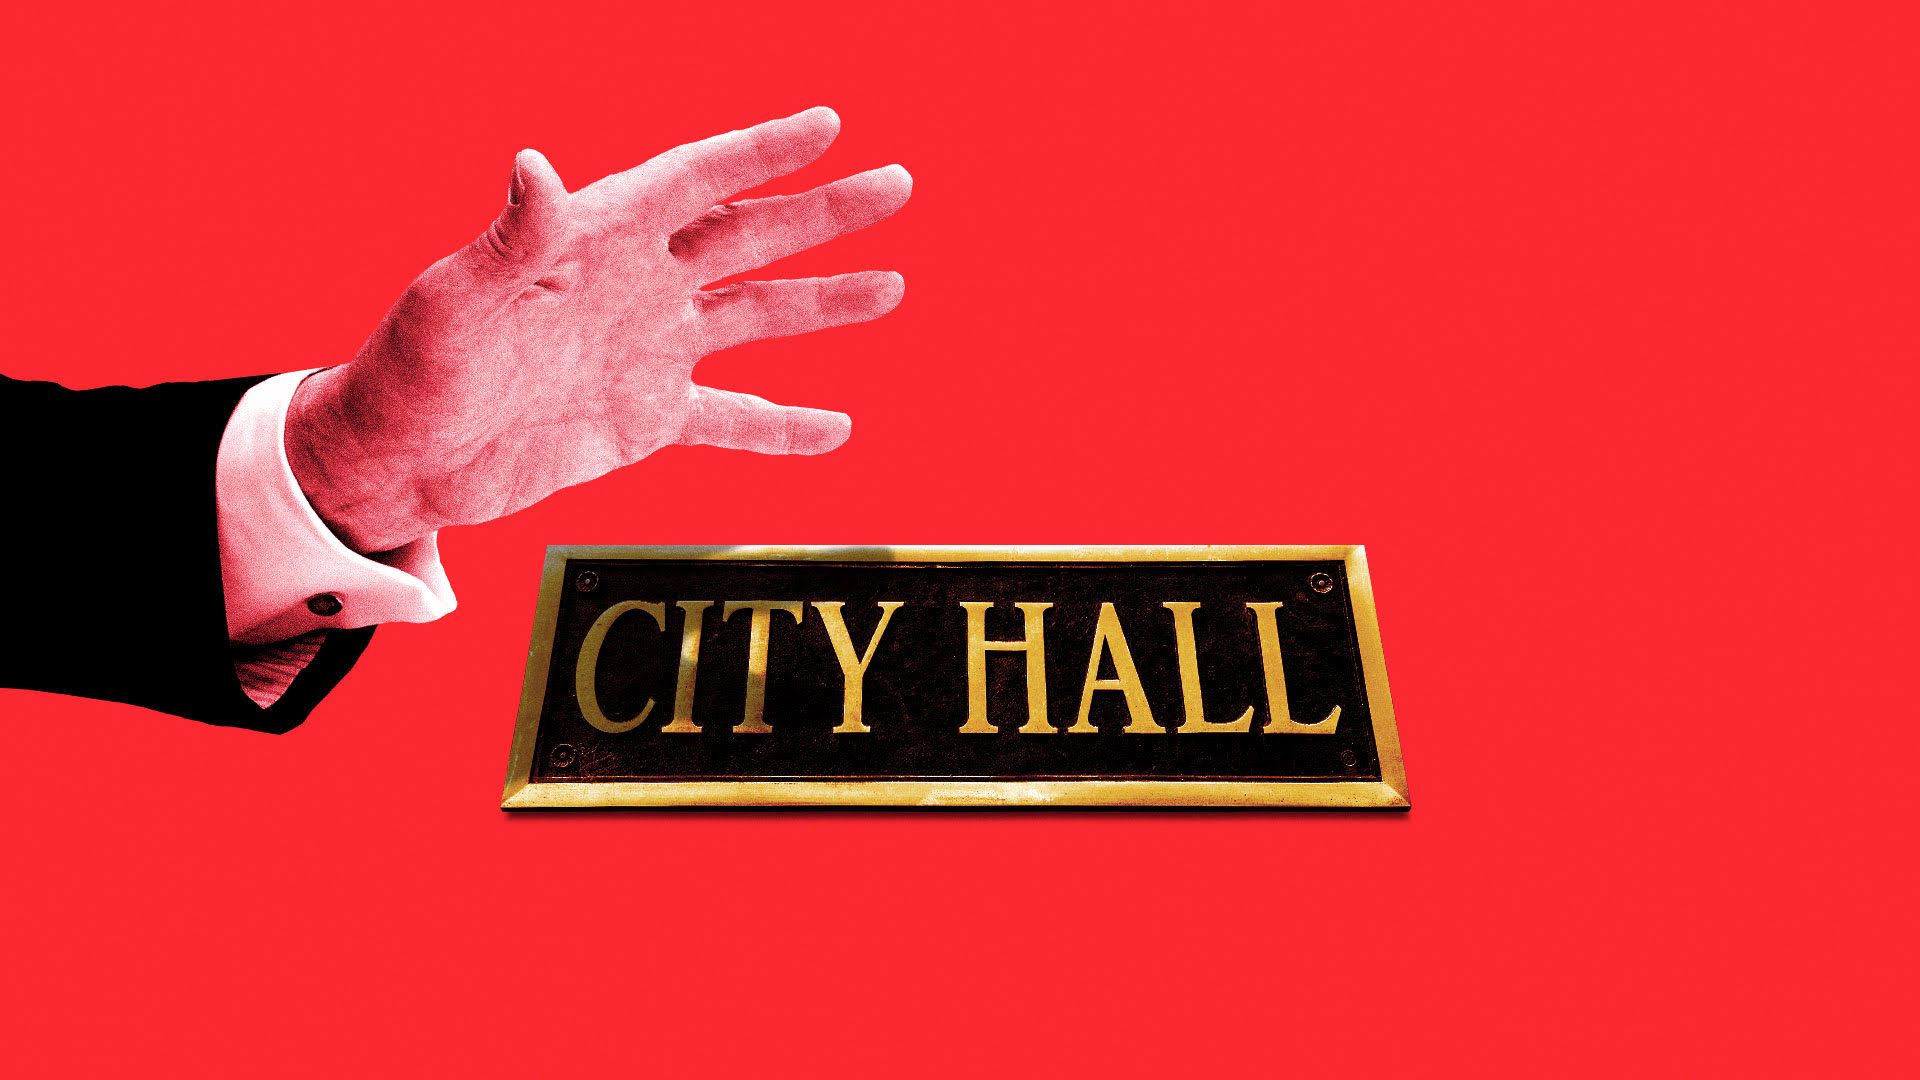 Illustration of Donald Trump’s hand reaching to grab a City Hall name plaque